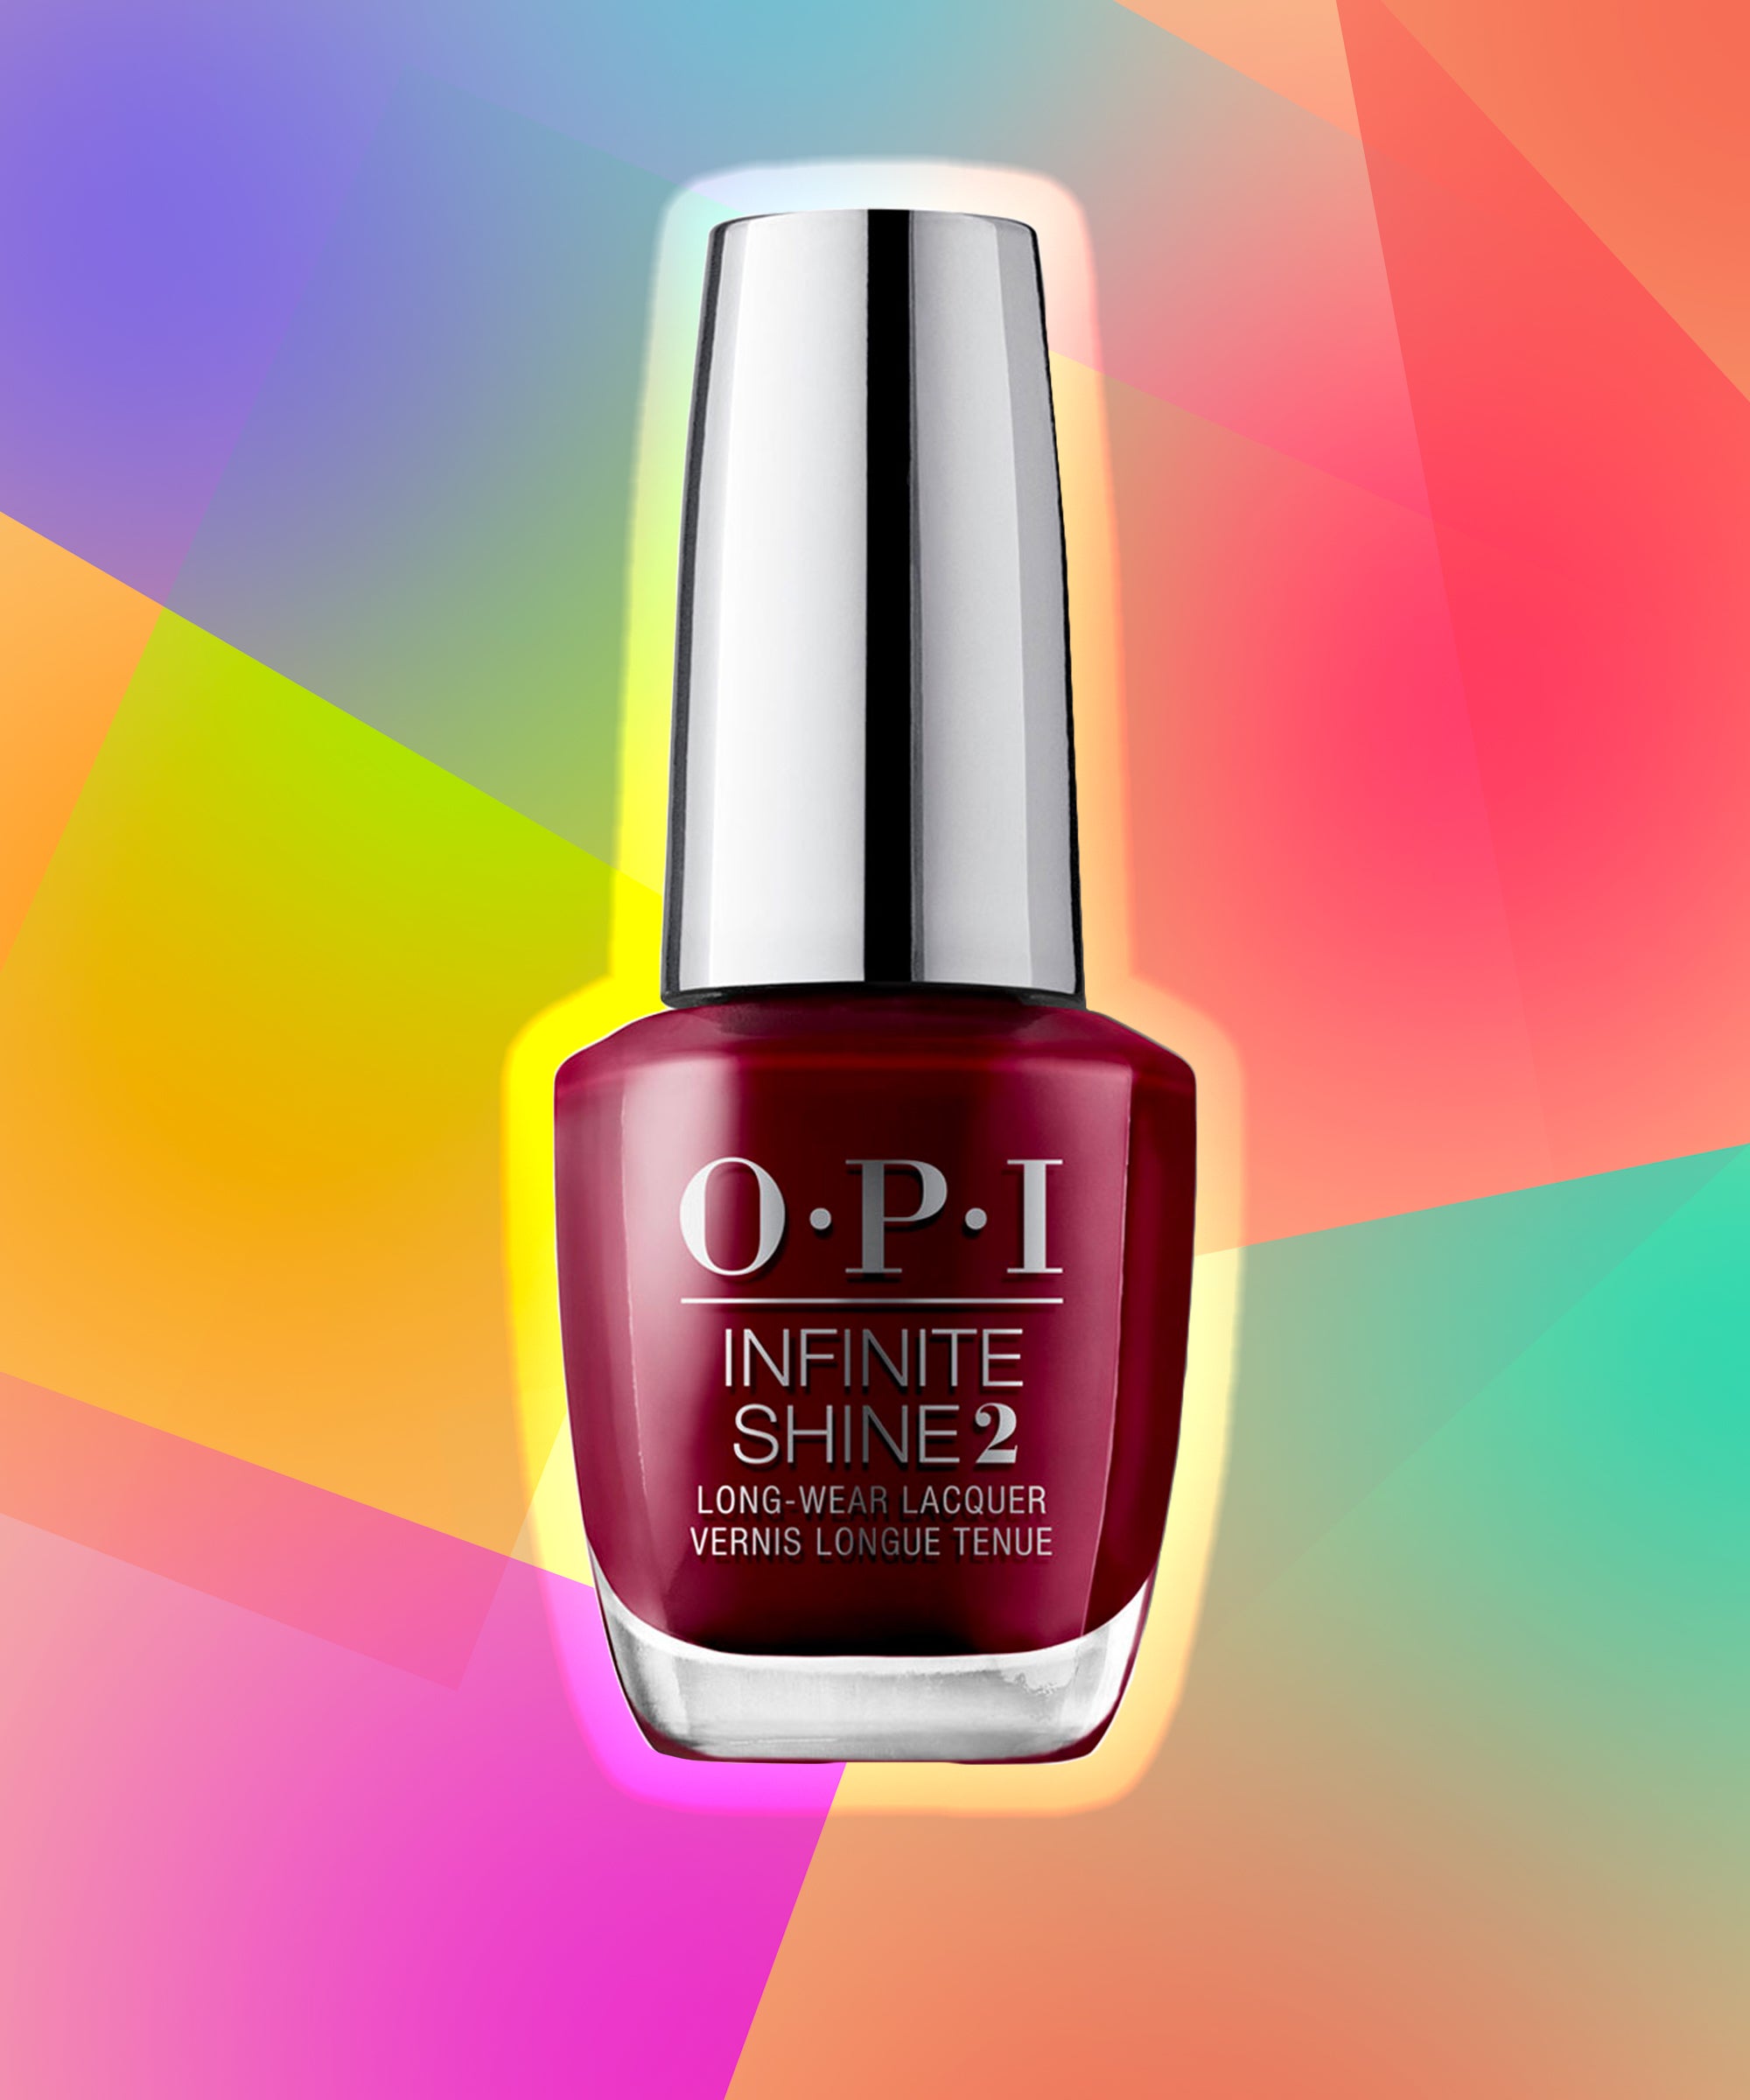 Every Nail Polish Shade in our Fall 2022 Lineup - Blog | OPI